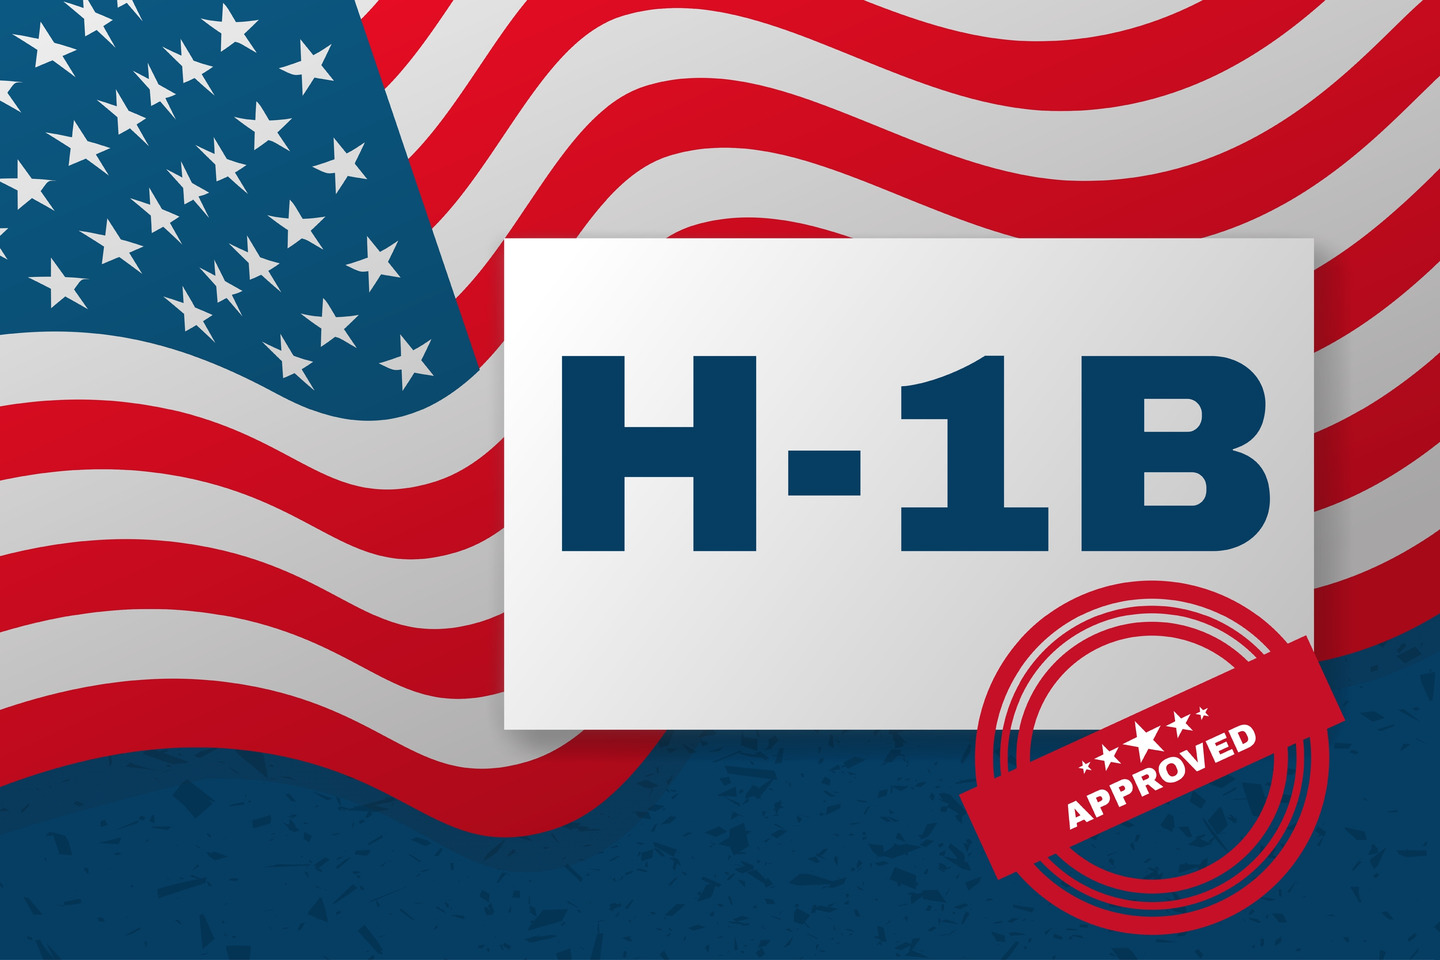 The US needs to work on its response to the H-1B visa problem.